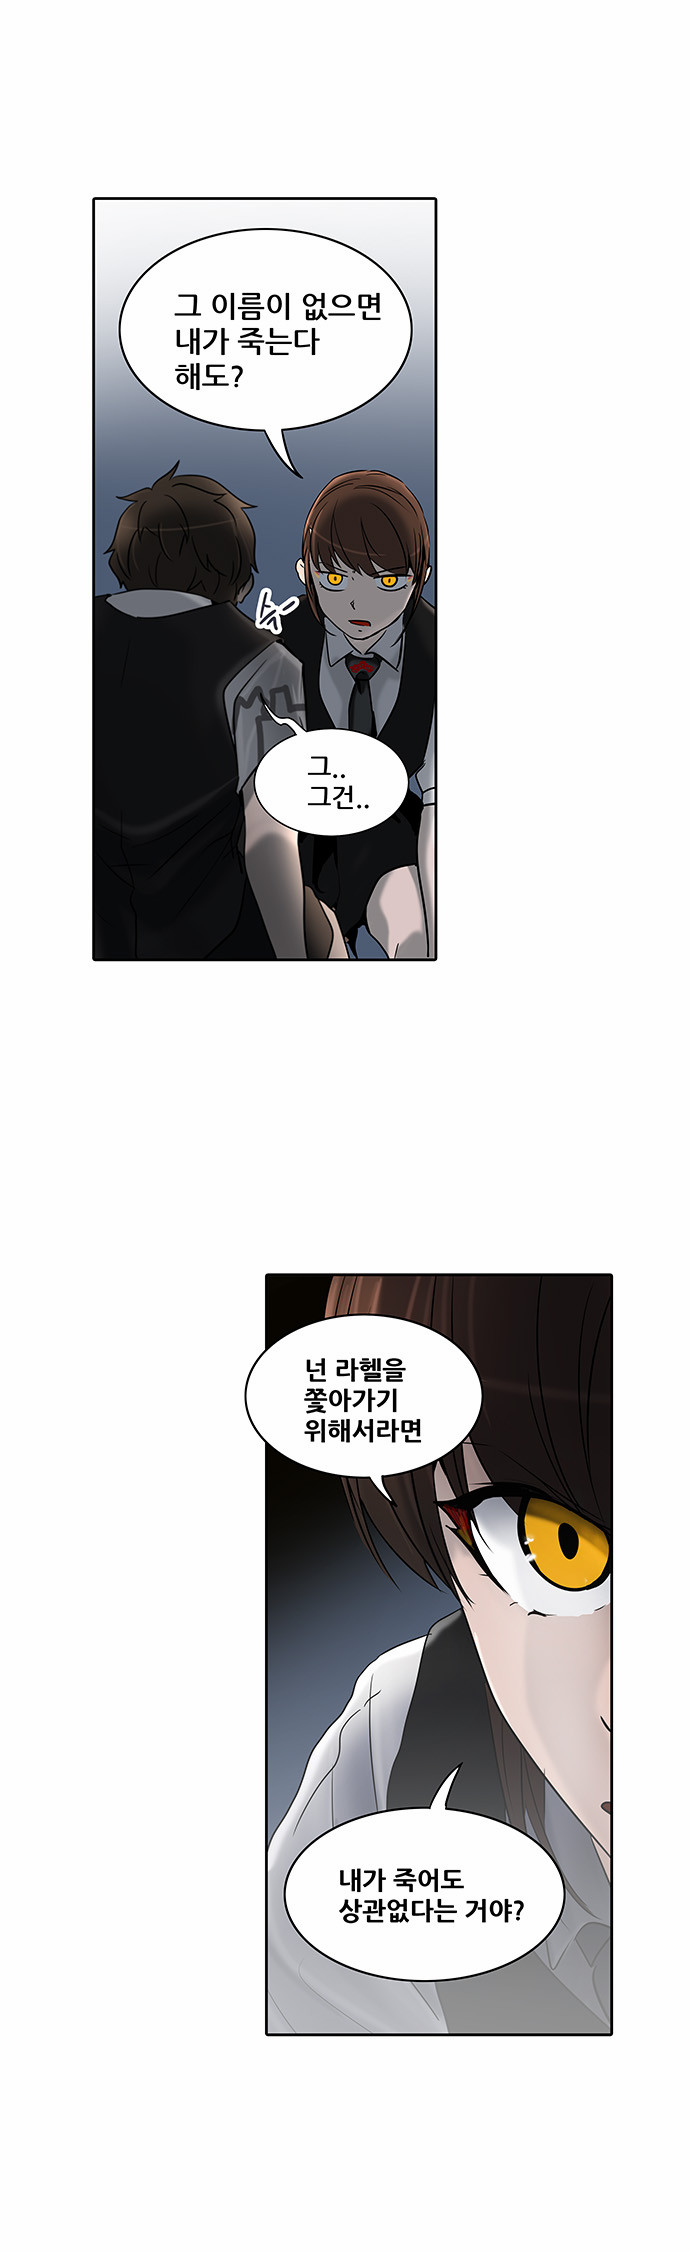 Tower of God - Chapter 288 - Page 2